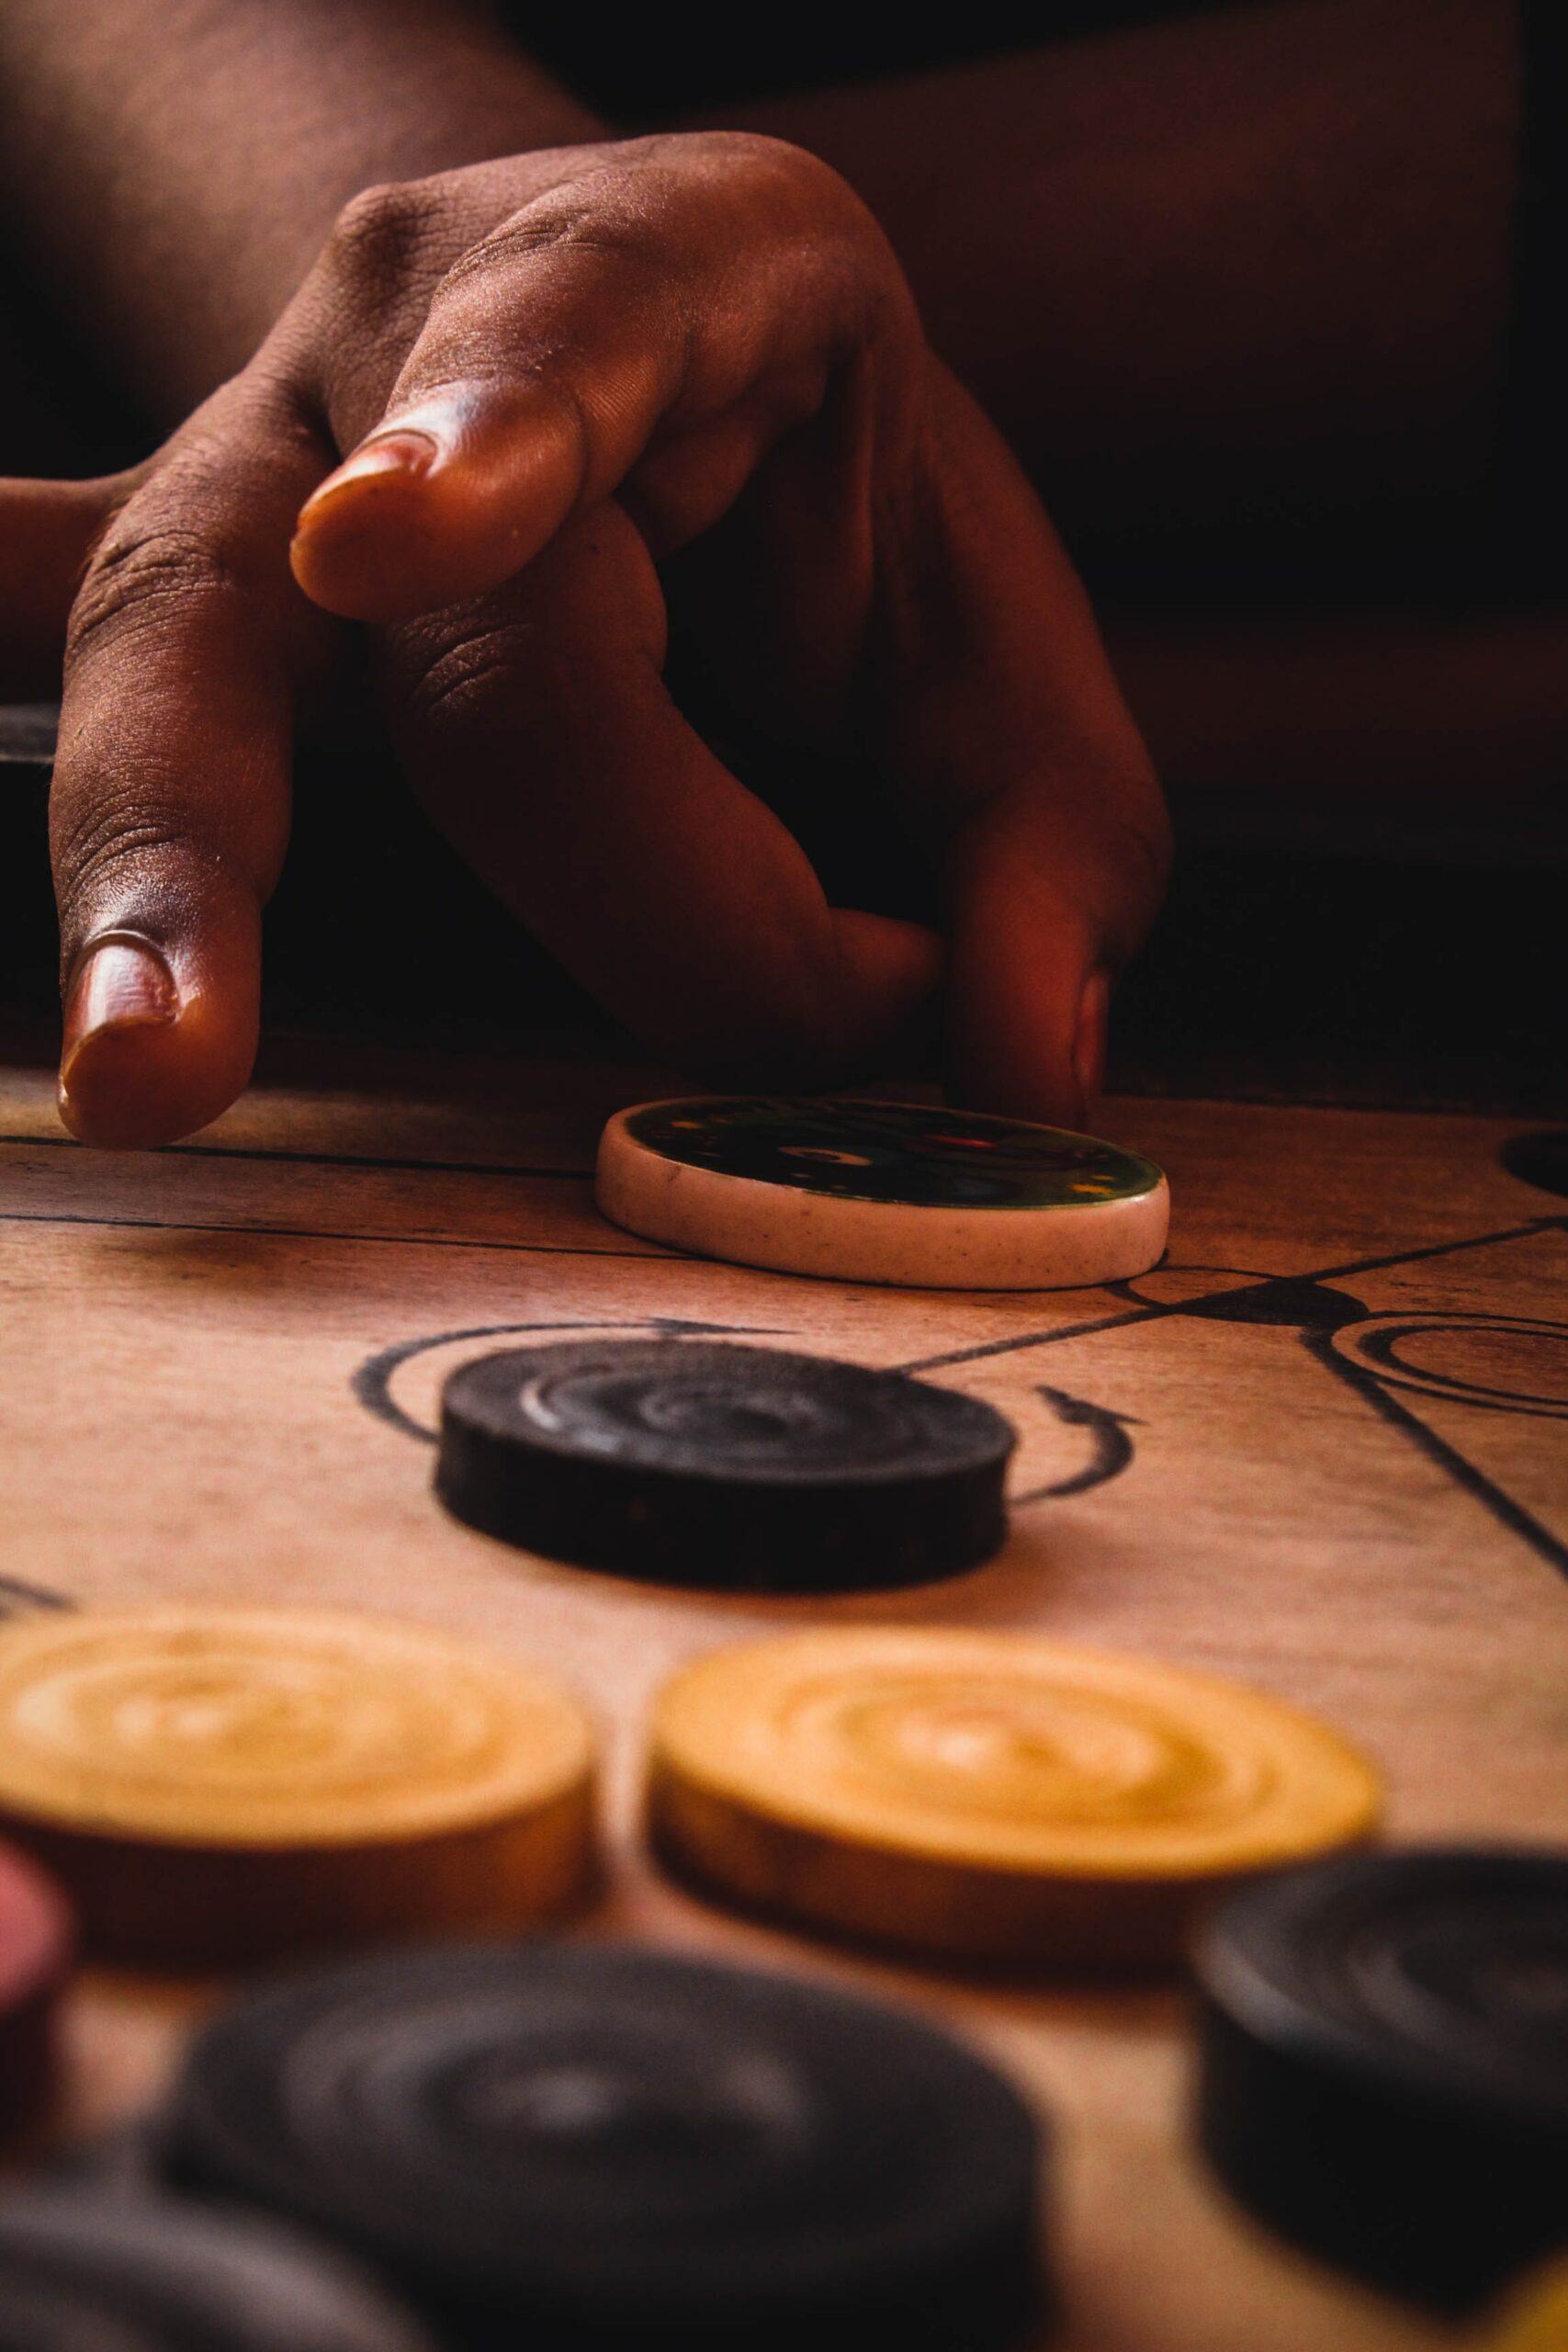 Photo of someone about to flick a carrom piece across the game board.